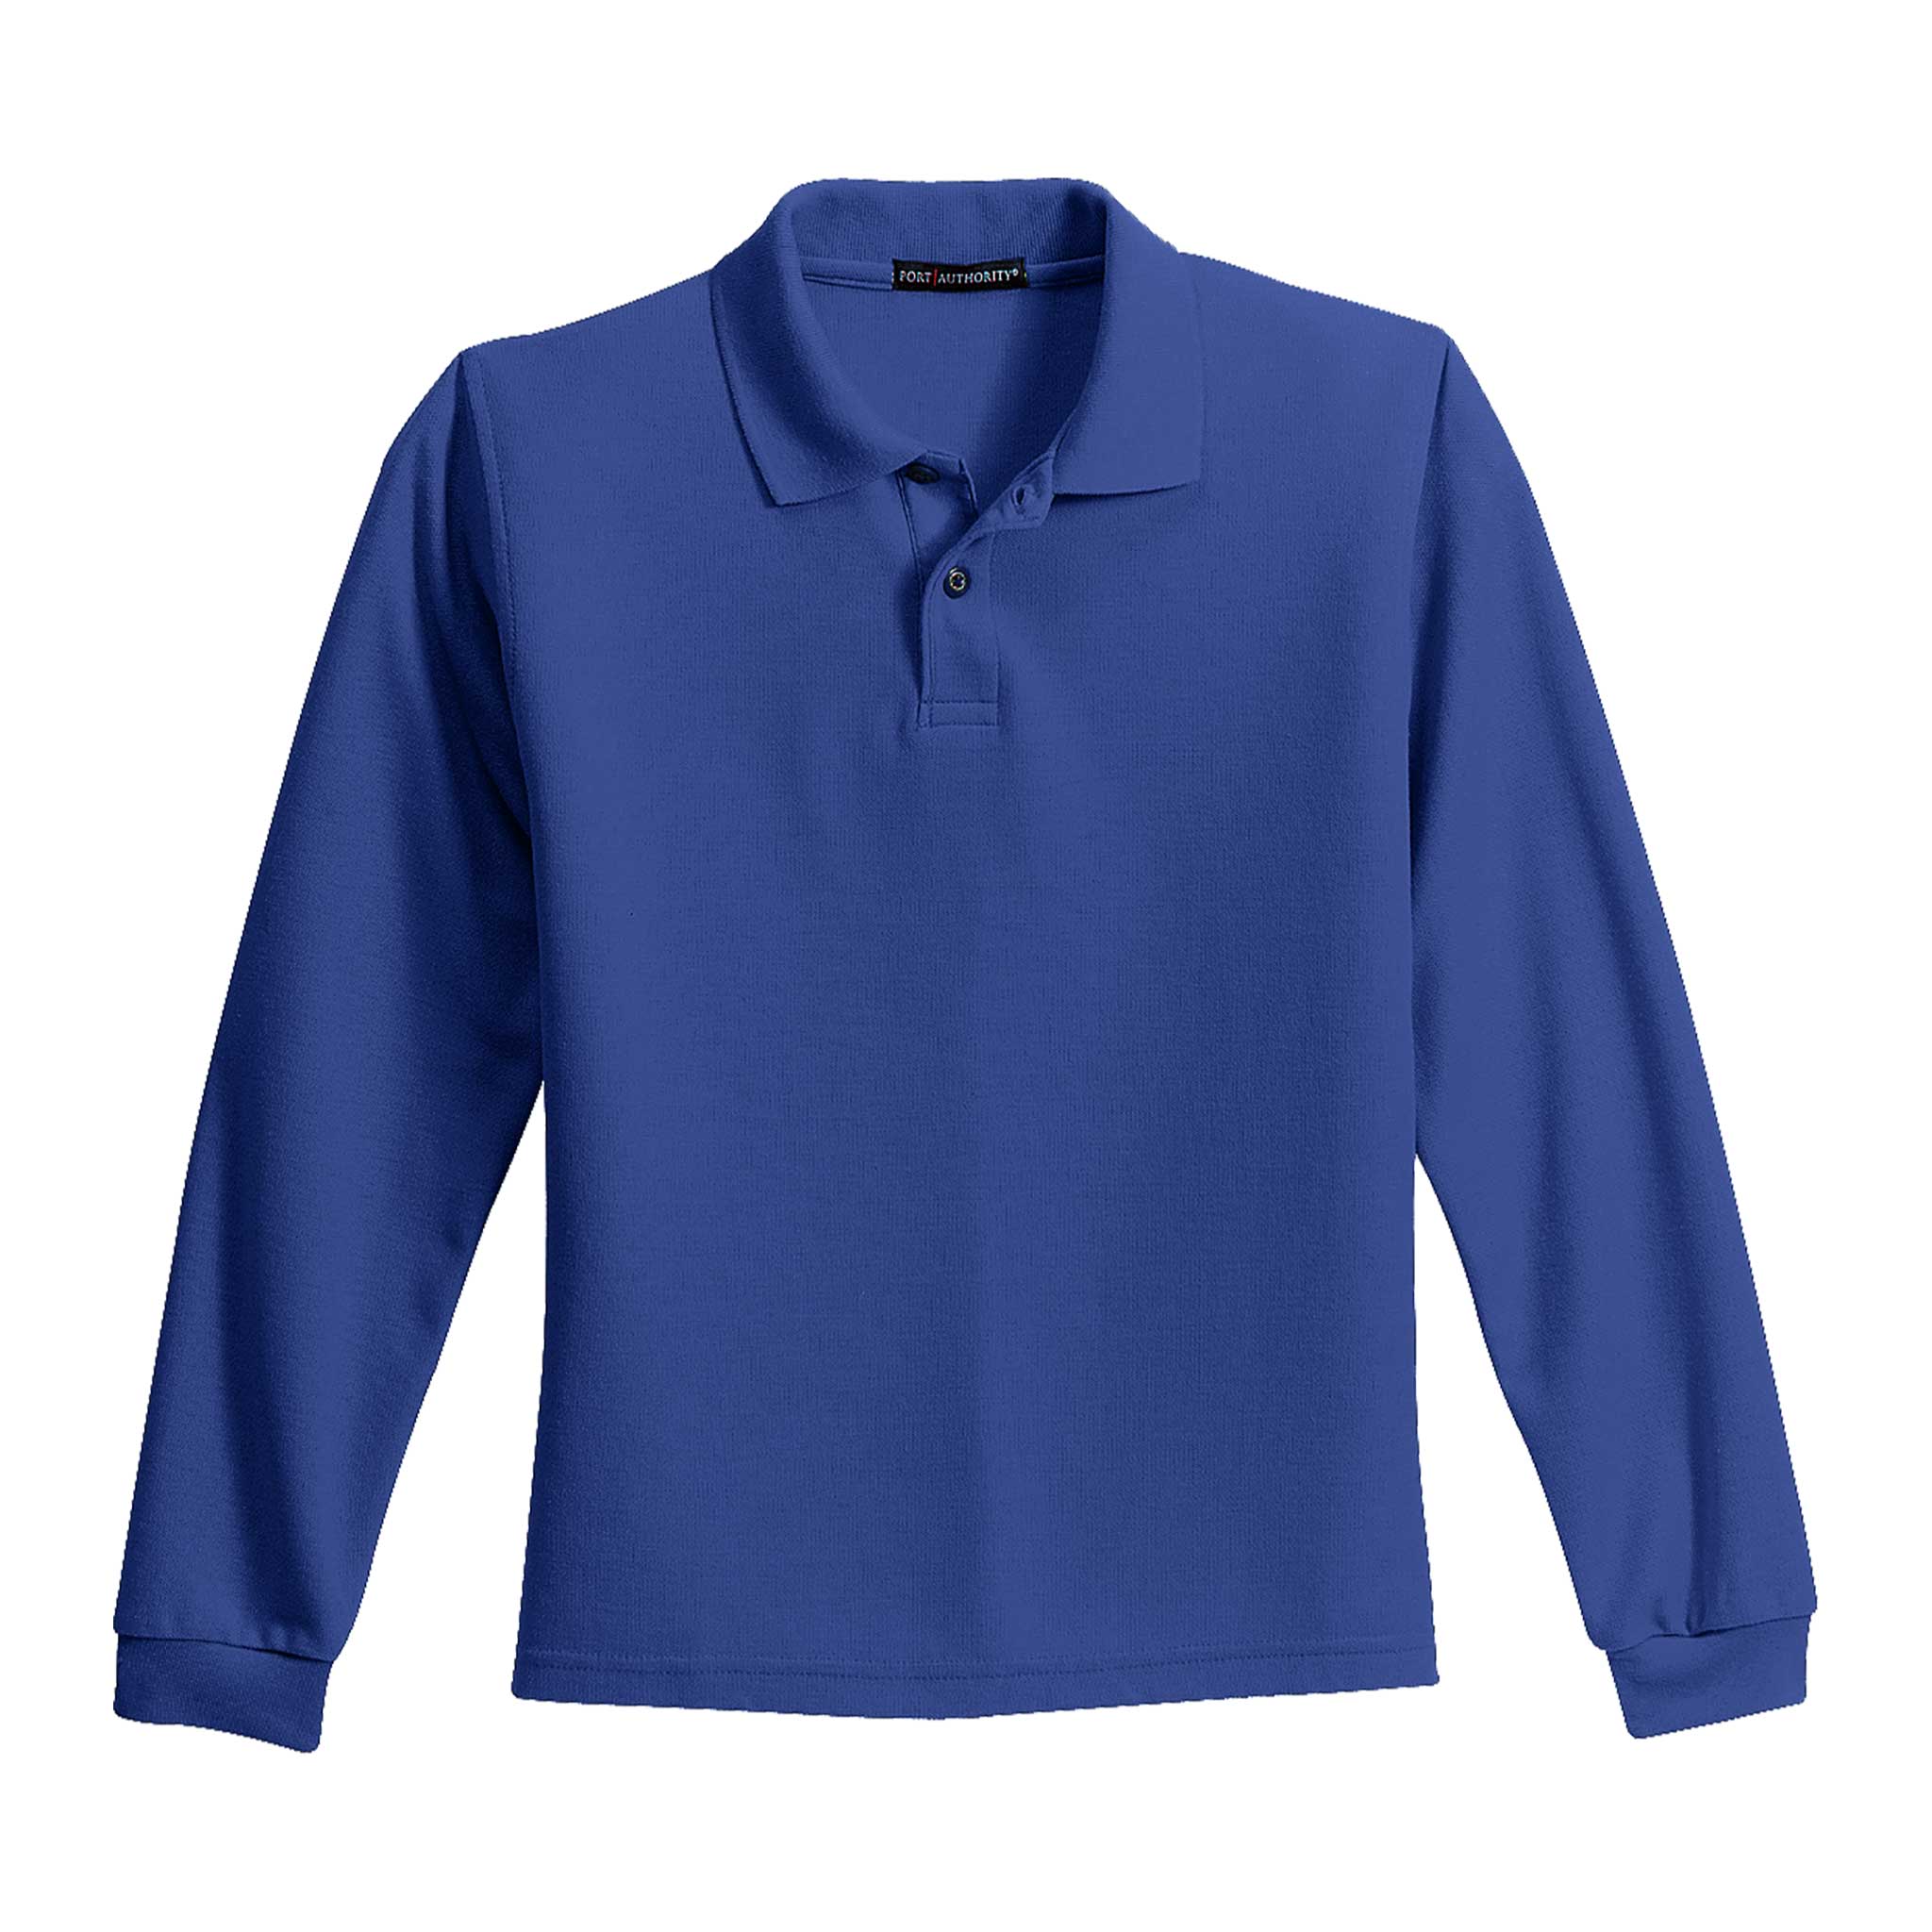 Youth L/S Soft Touch Polo